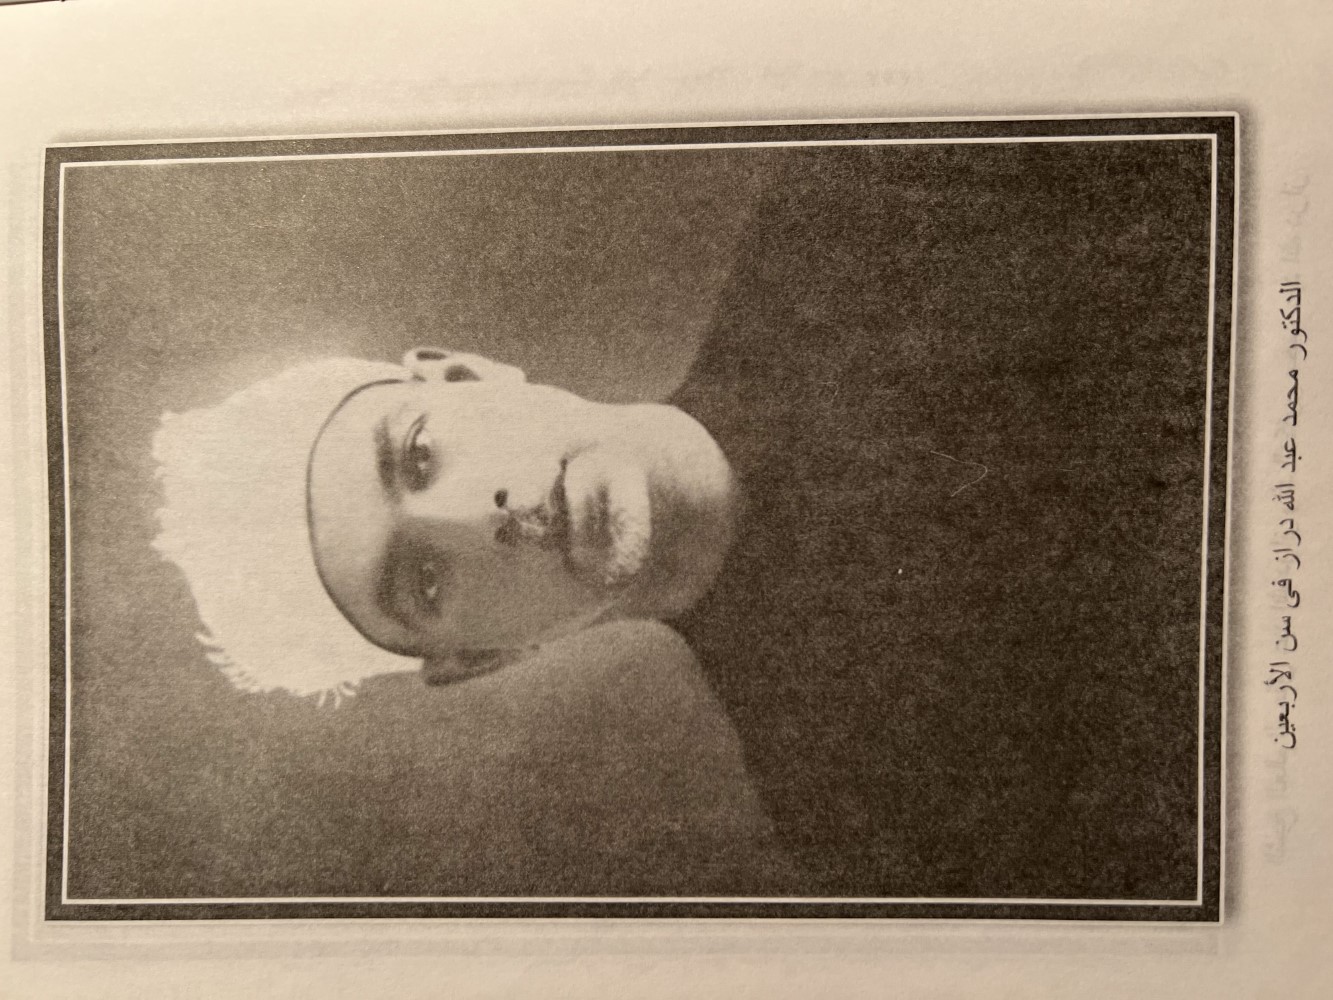 Photo of a young Mohamed Abdullah Draz